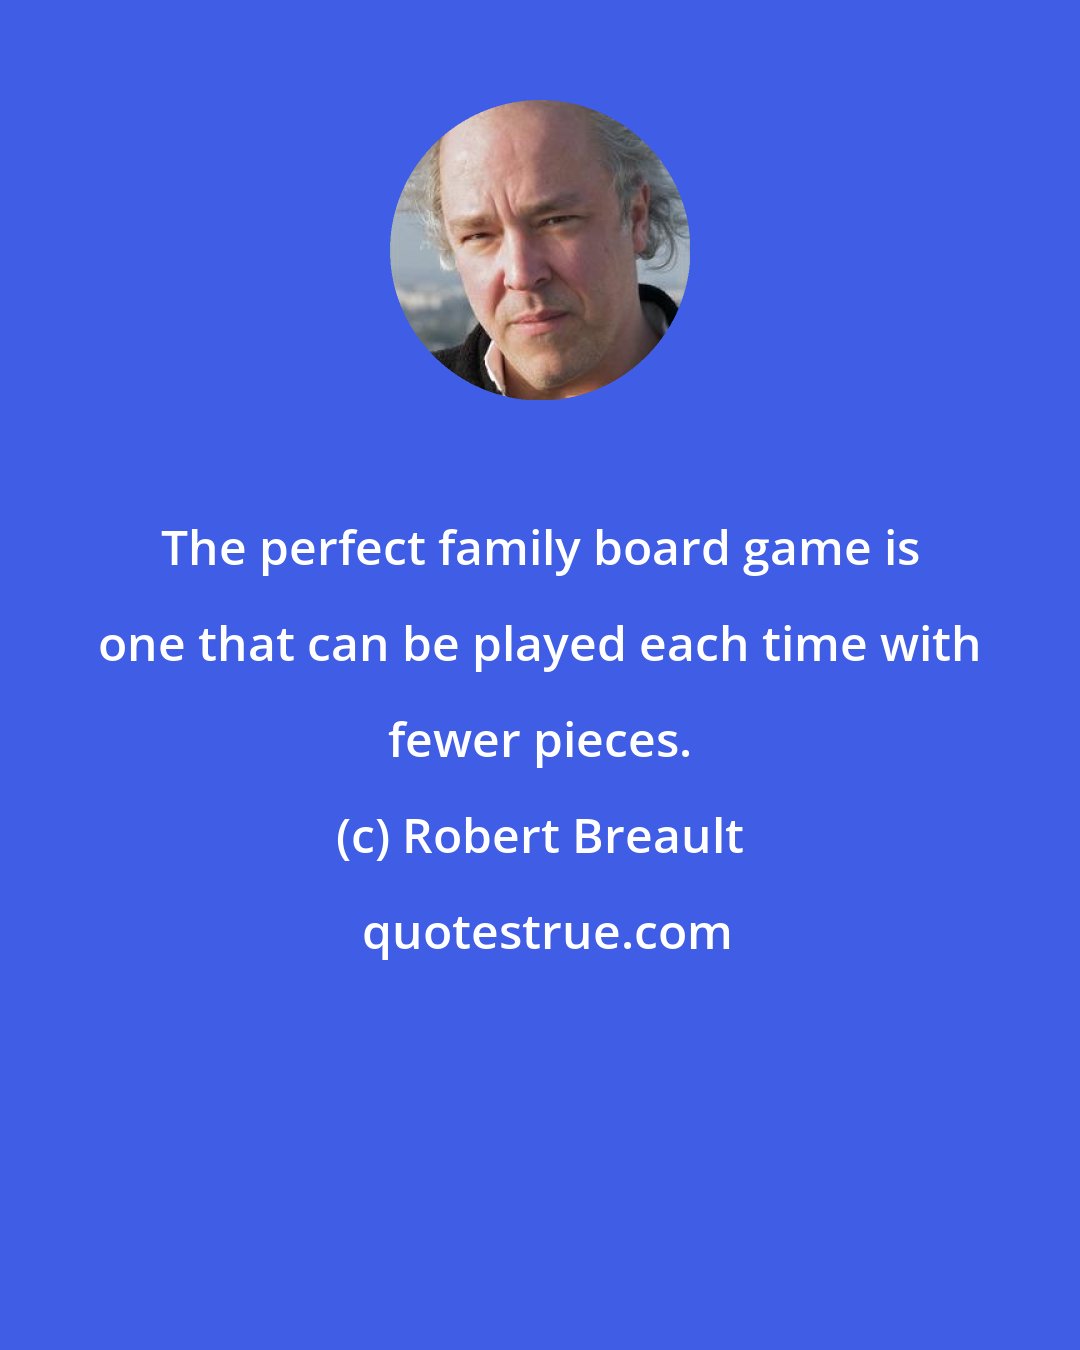 Robert Breault: The perfect family board game is one that can be played each time with fewer pieces.